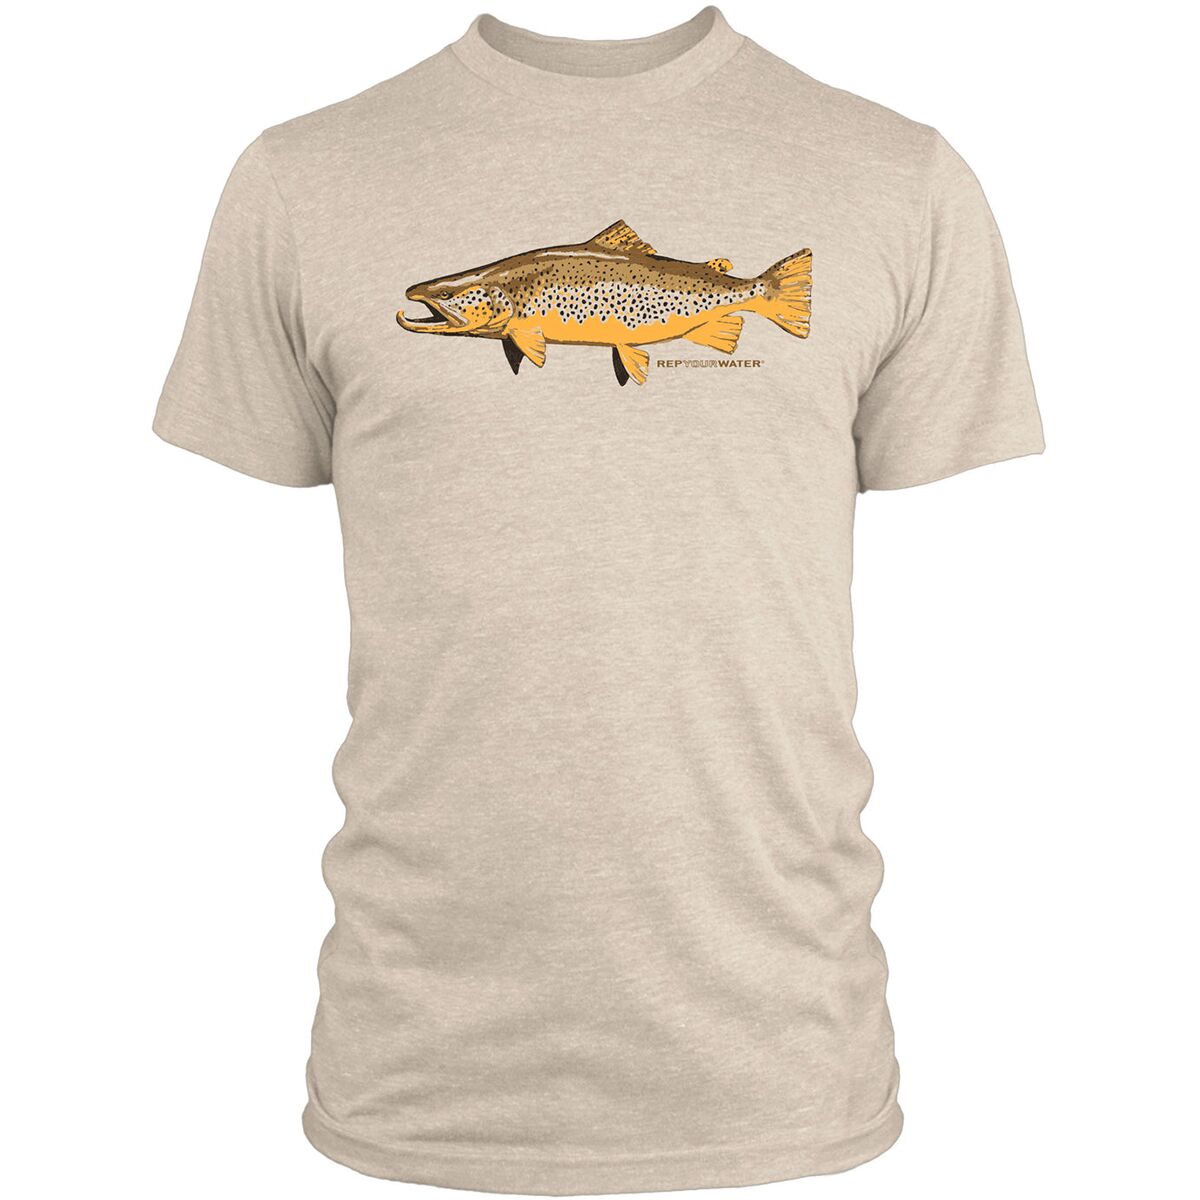 Rep Your Water Artist's Reserve Brown Trout T-Shirt - Men's